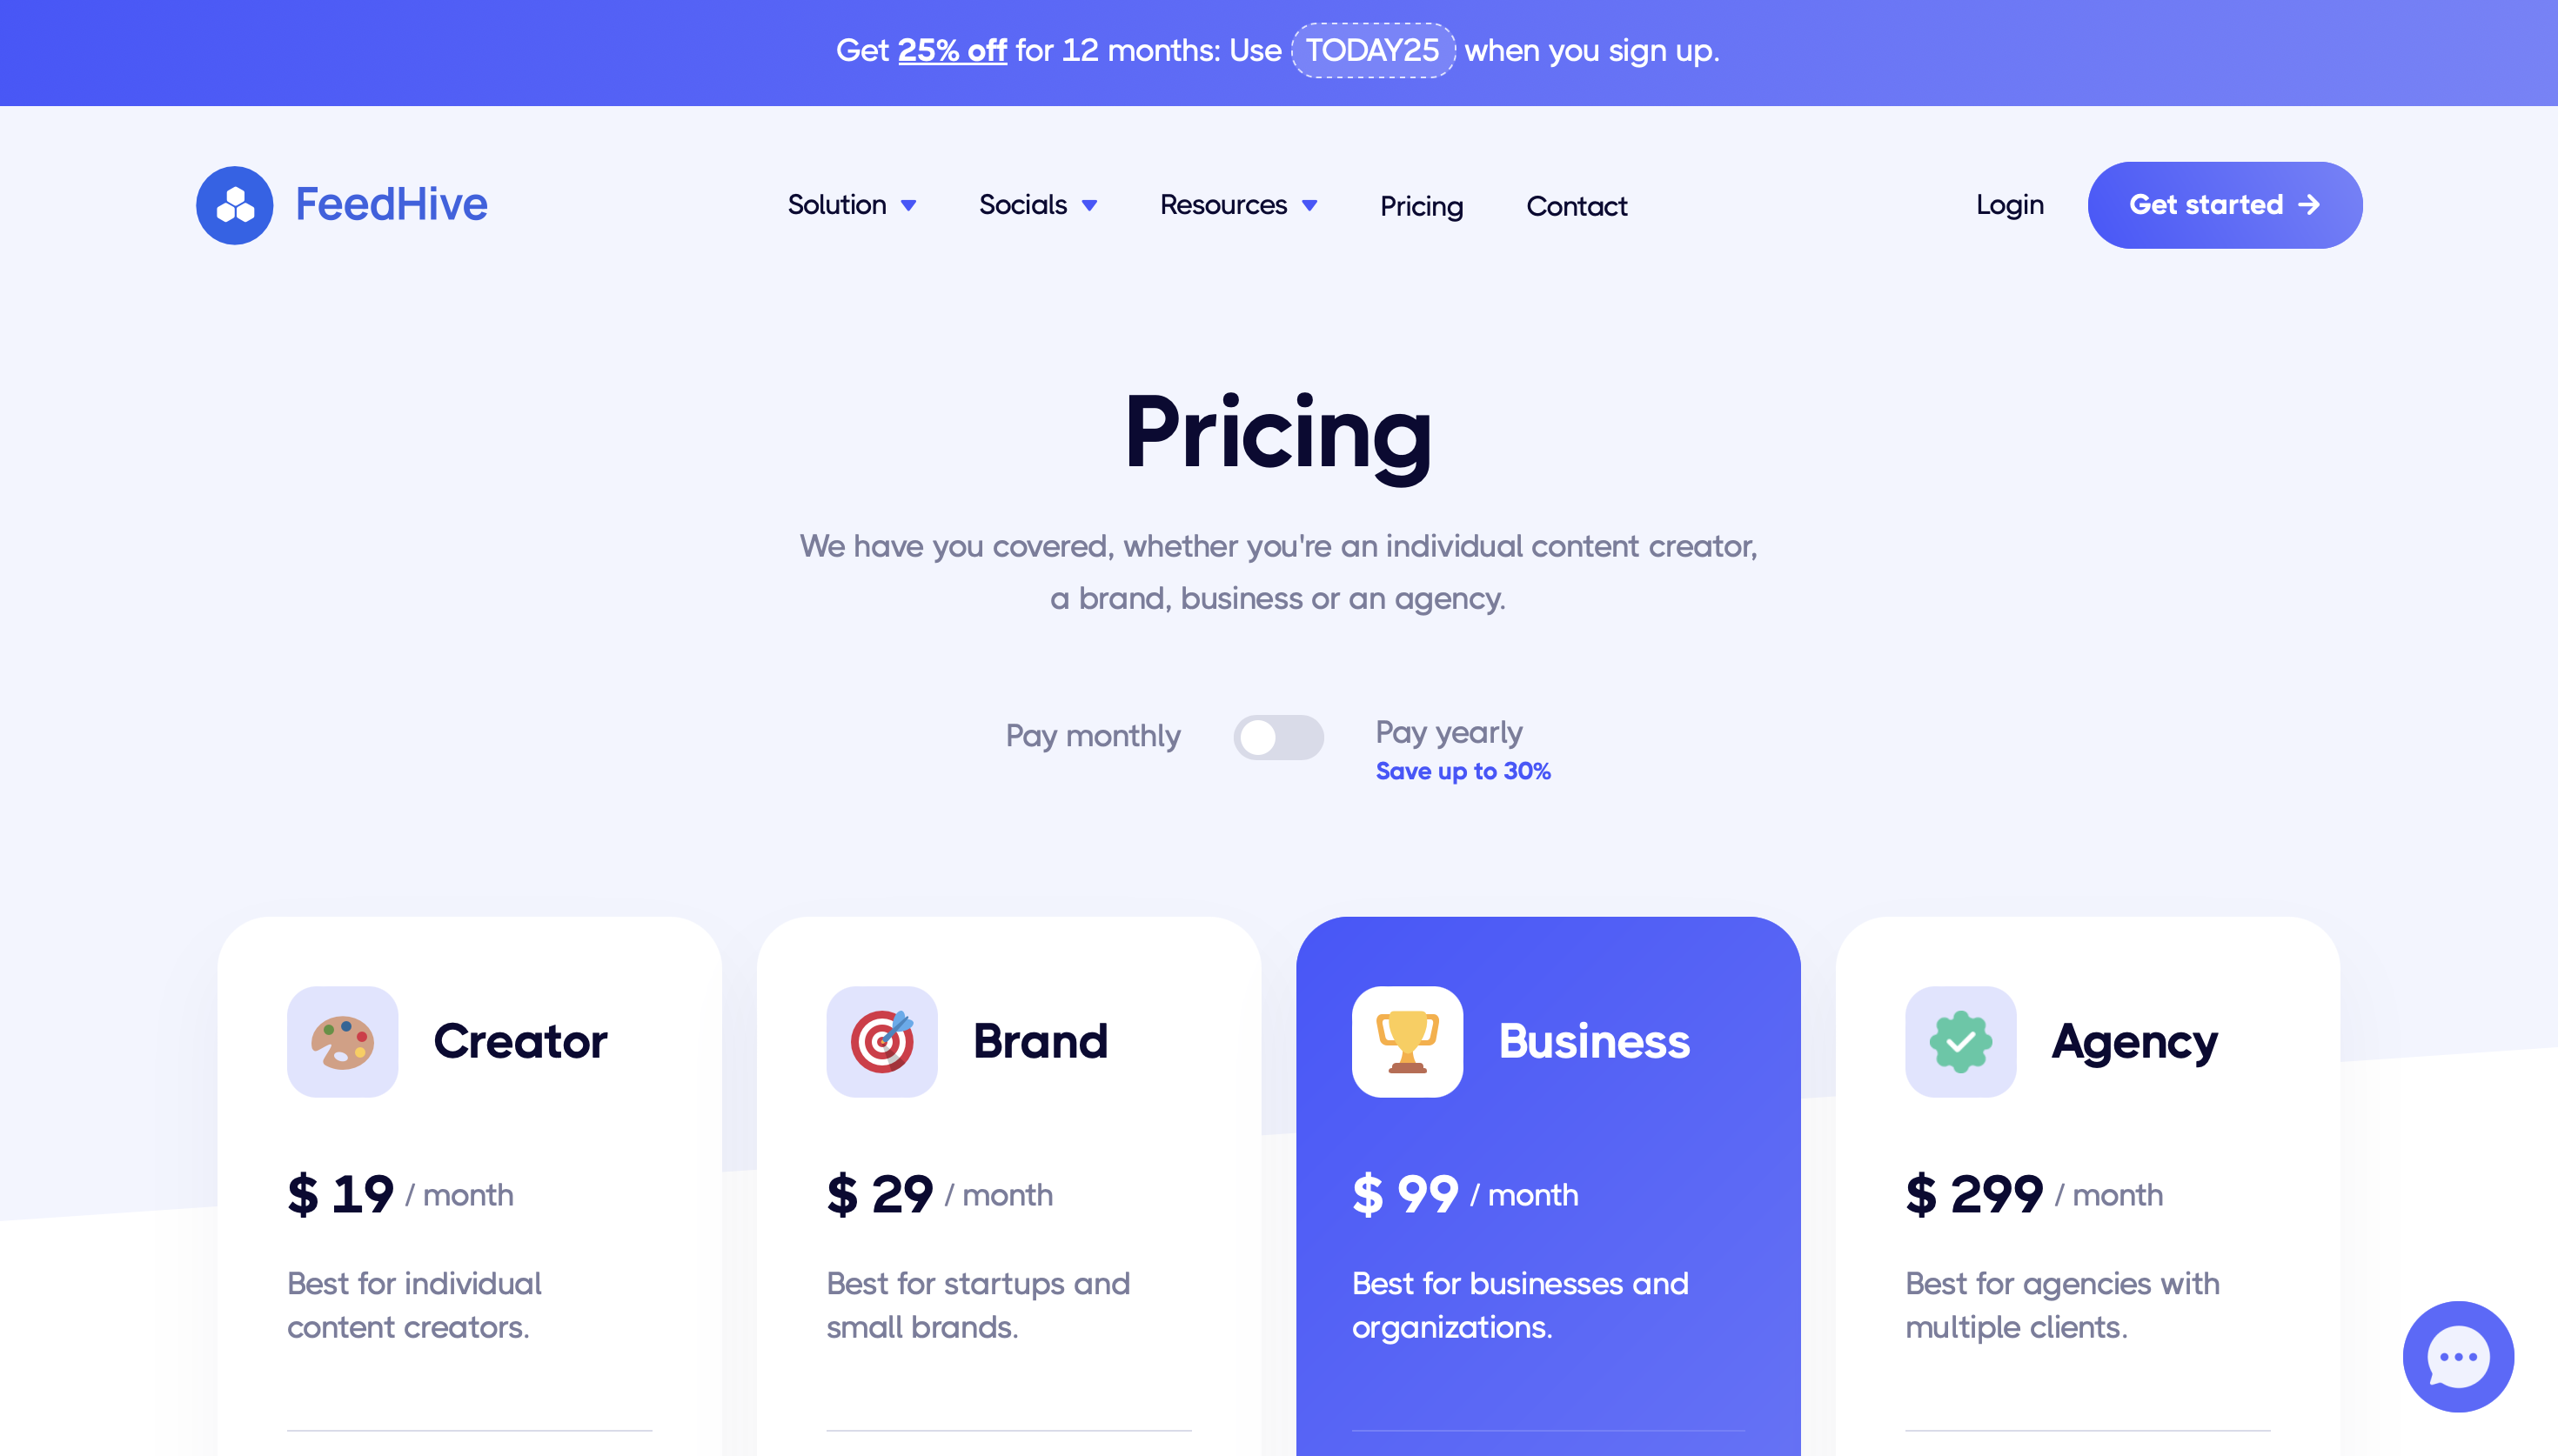 FeedHive Pricing